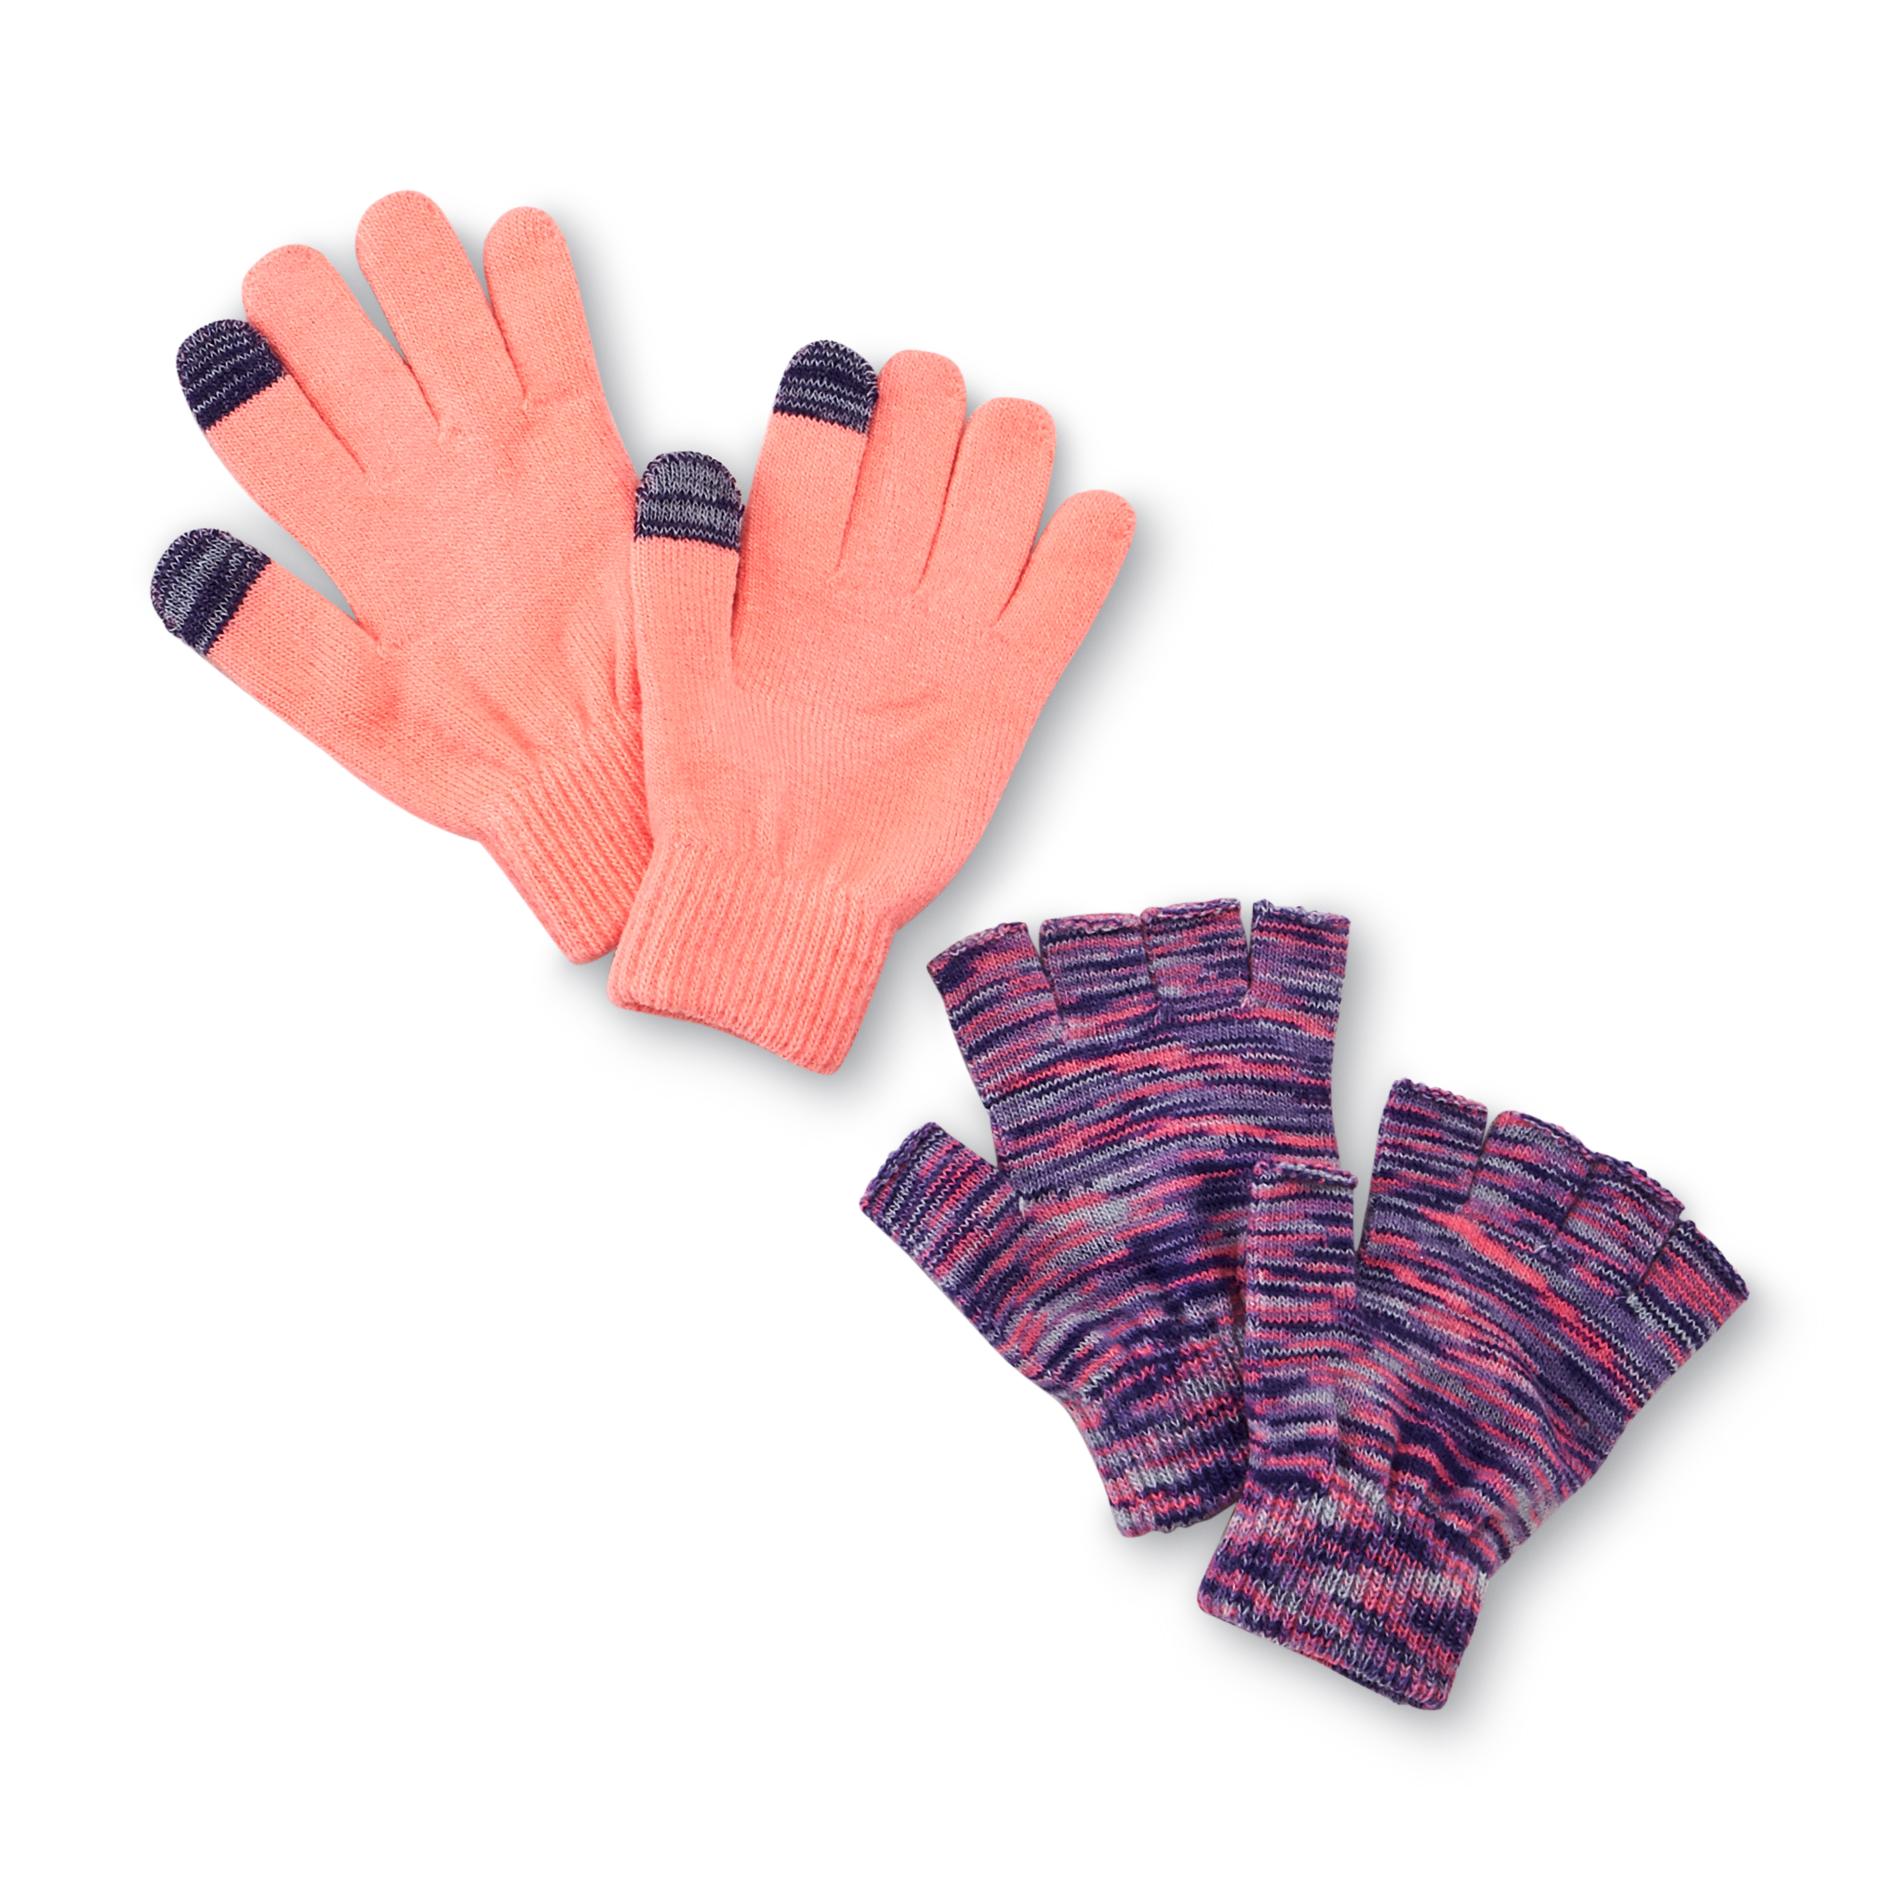 Joe Boxer Junior's 2-Pairs Stretch Gloves - Space-Dyed